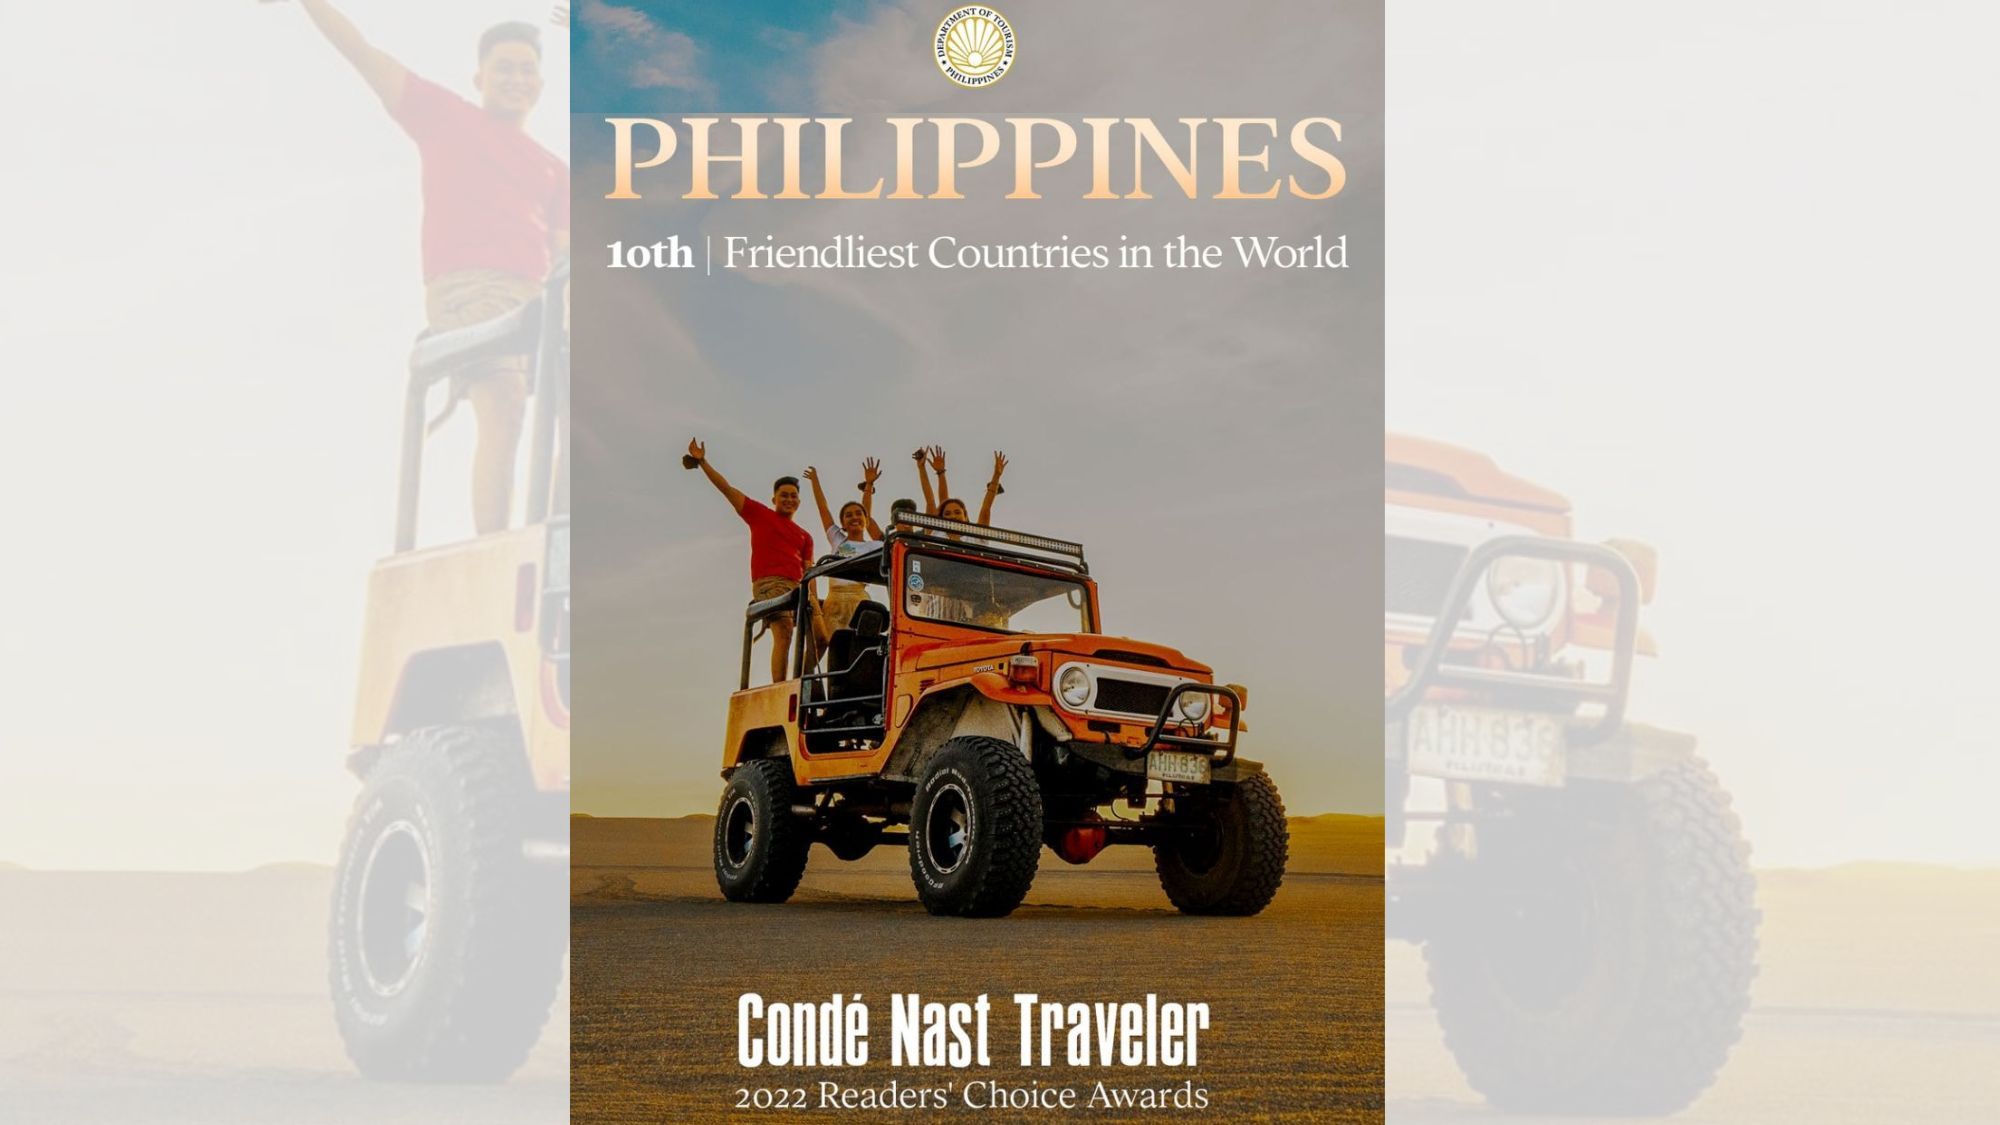 Travel magazine says Phil. is 10th ‘friendliest country’